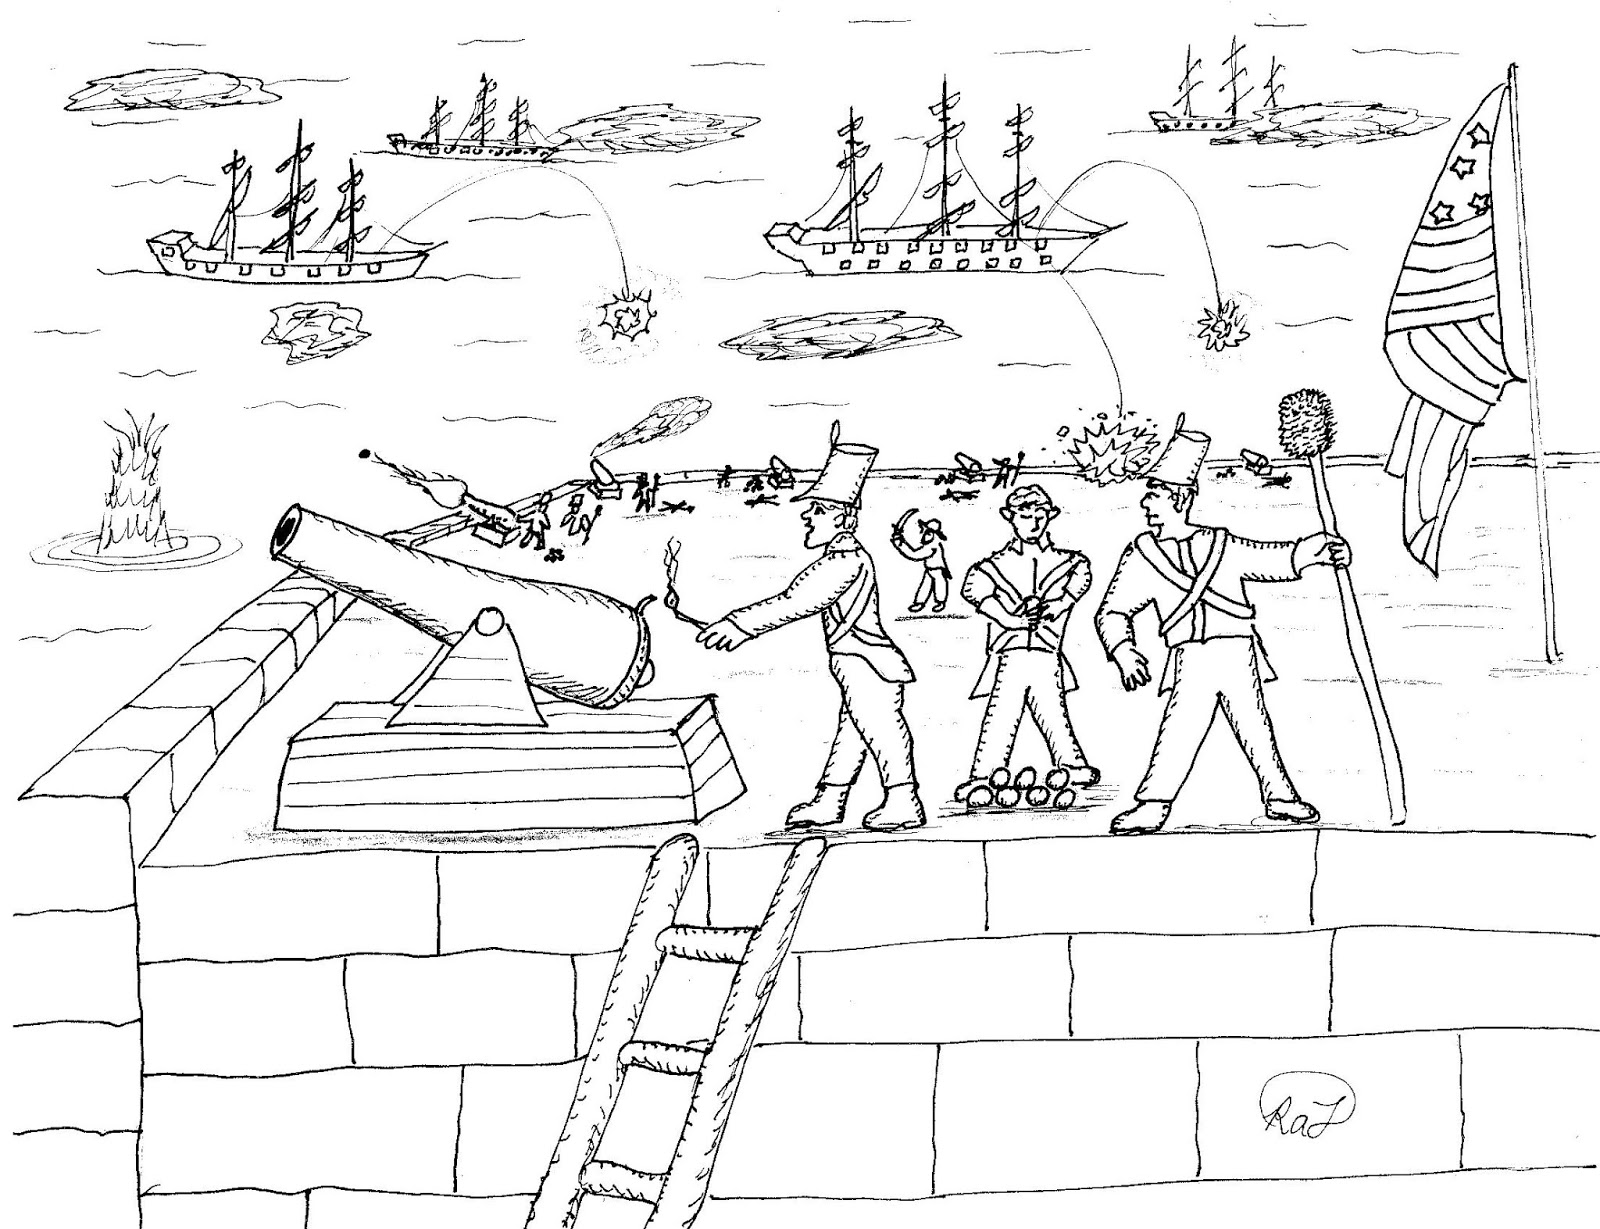 Robin's Great Coloring Pages: Battle of Baltimore, Fort McHenry